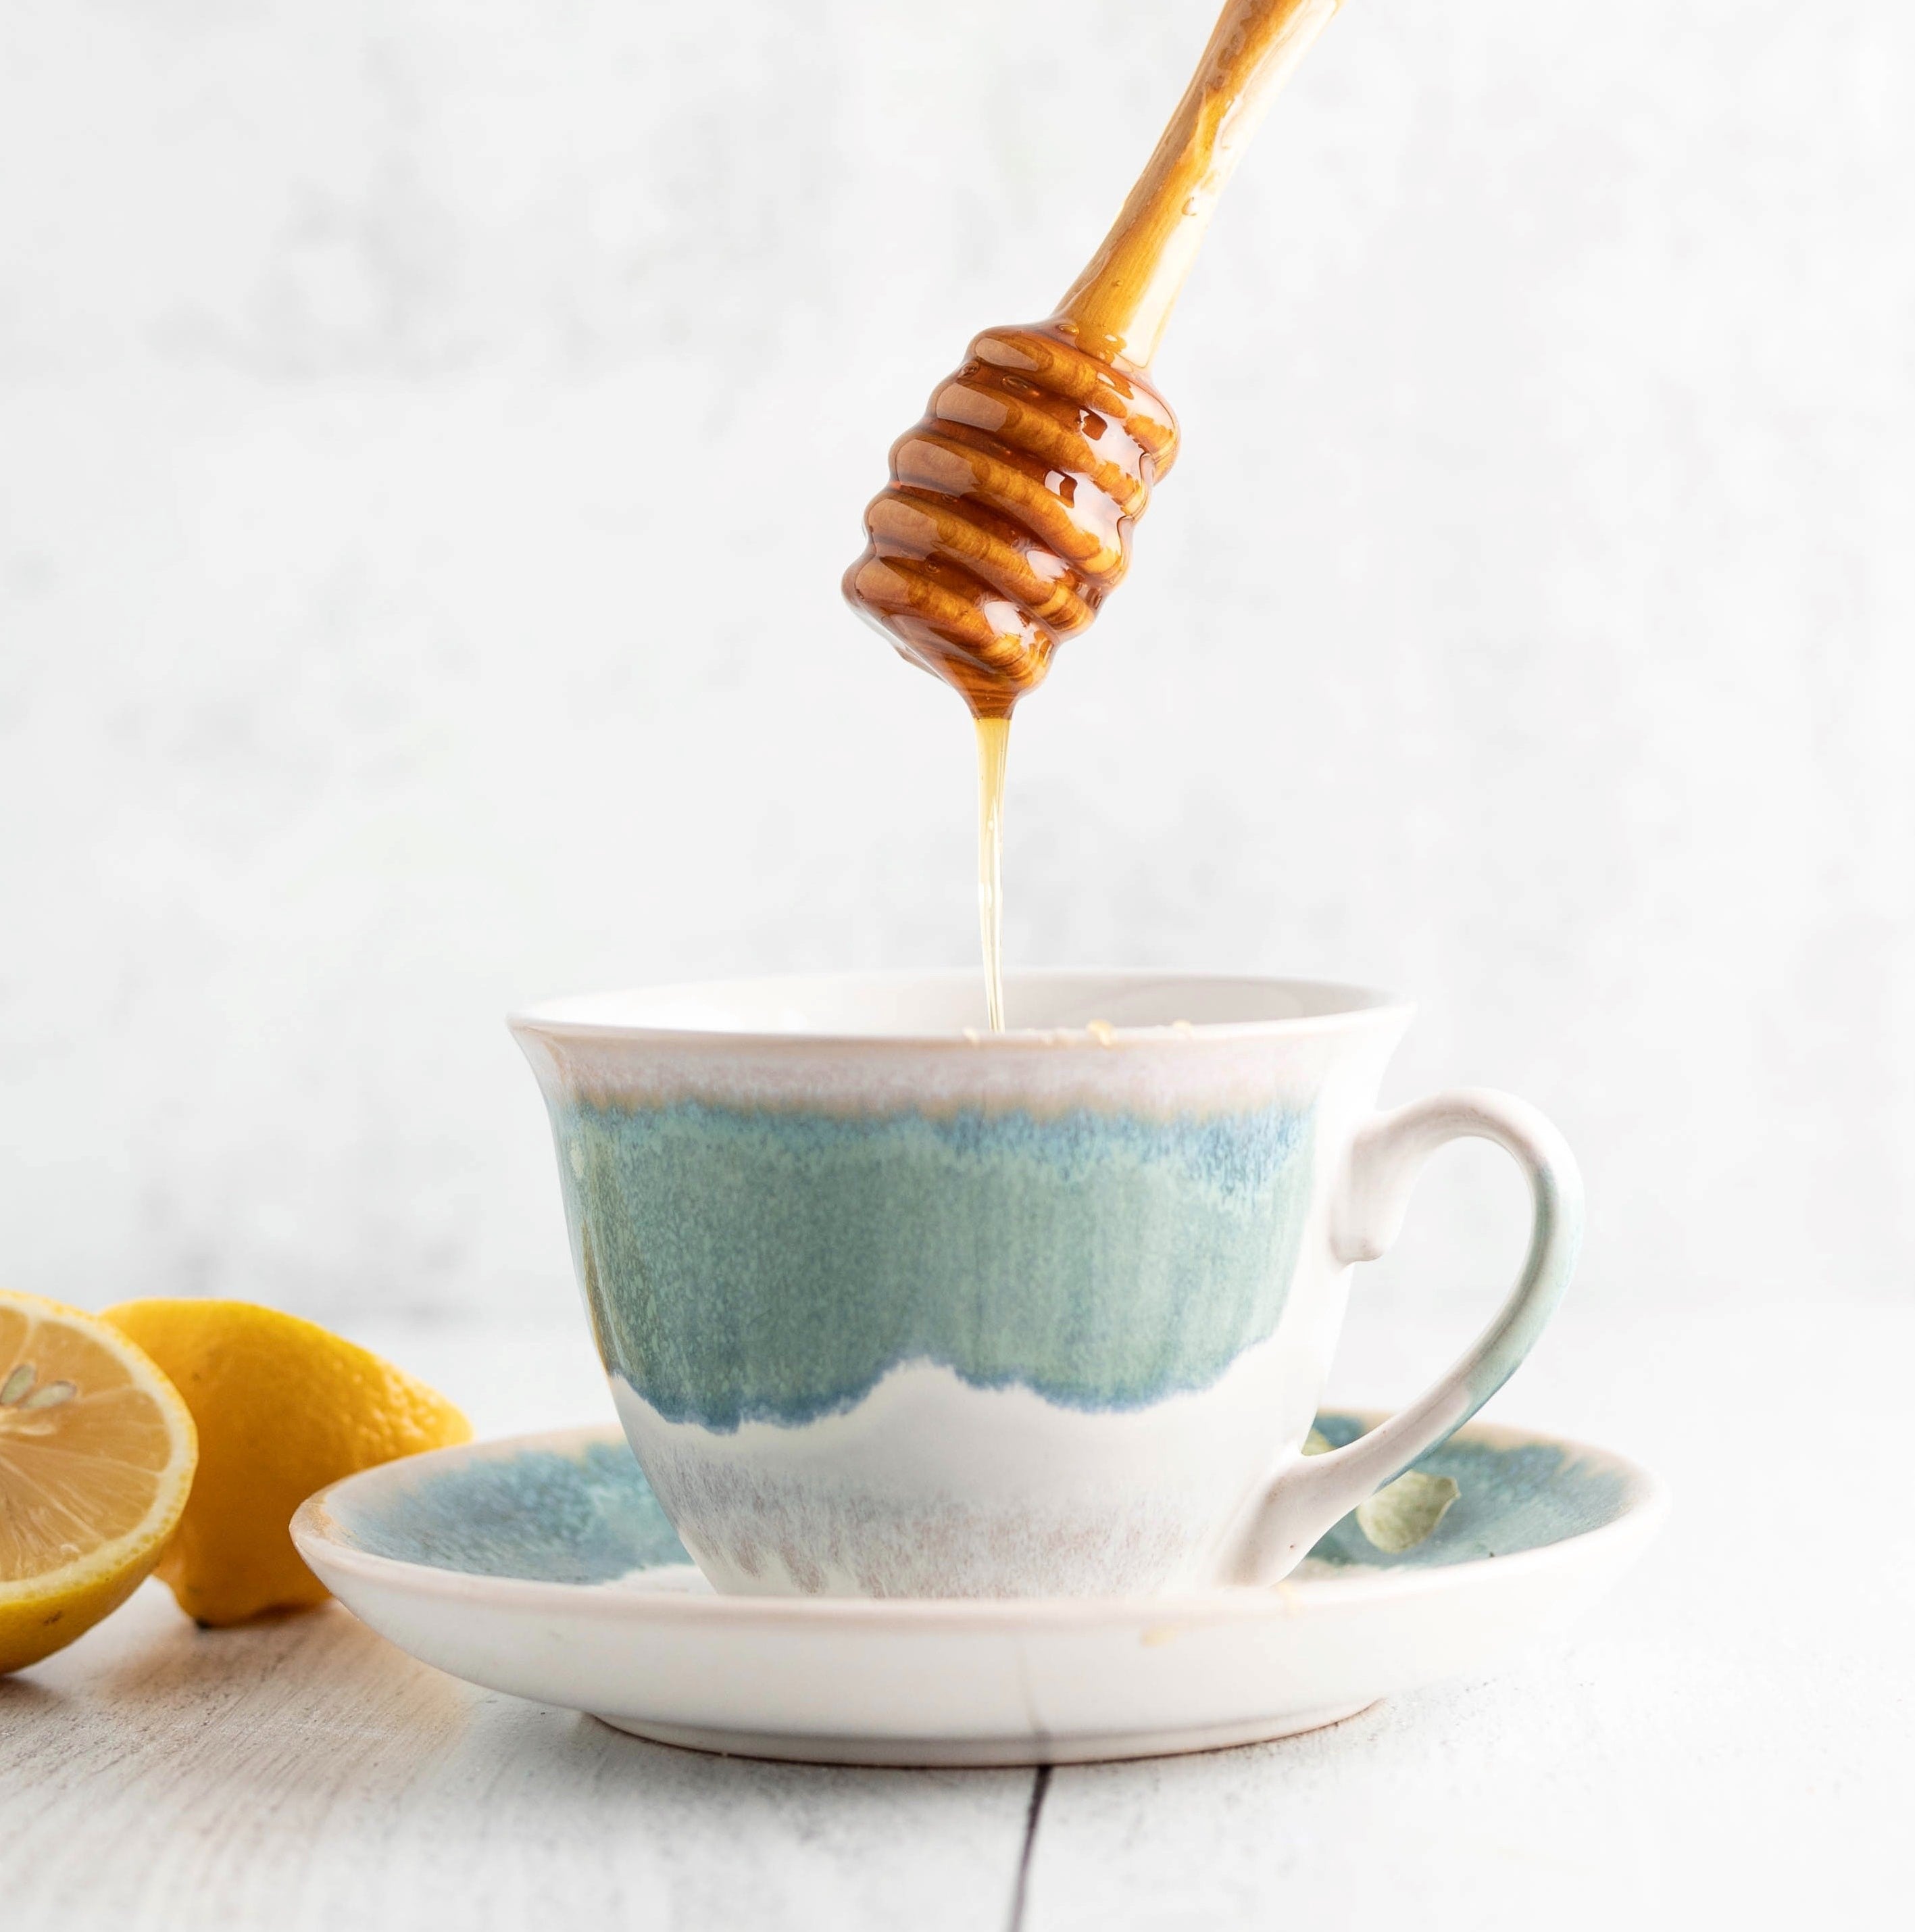 honey dripping into a blue and white teacup from a wooden honey dipper